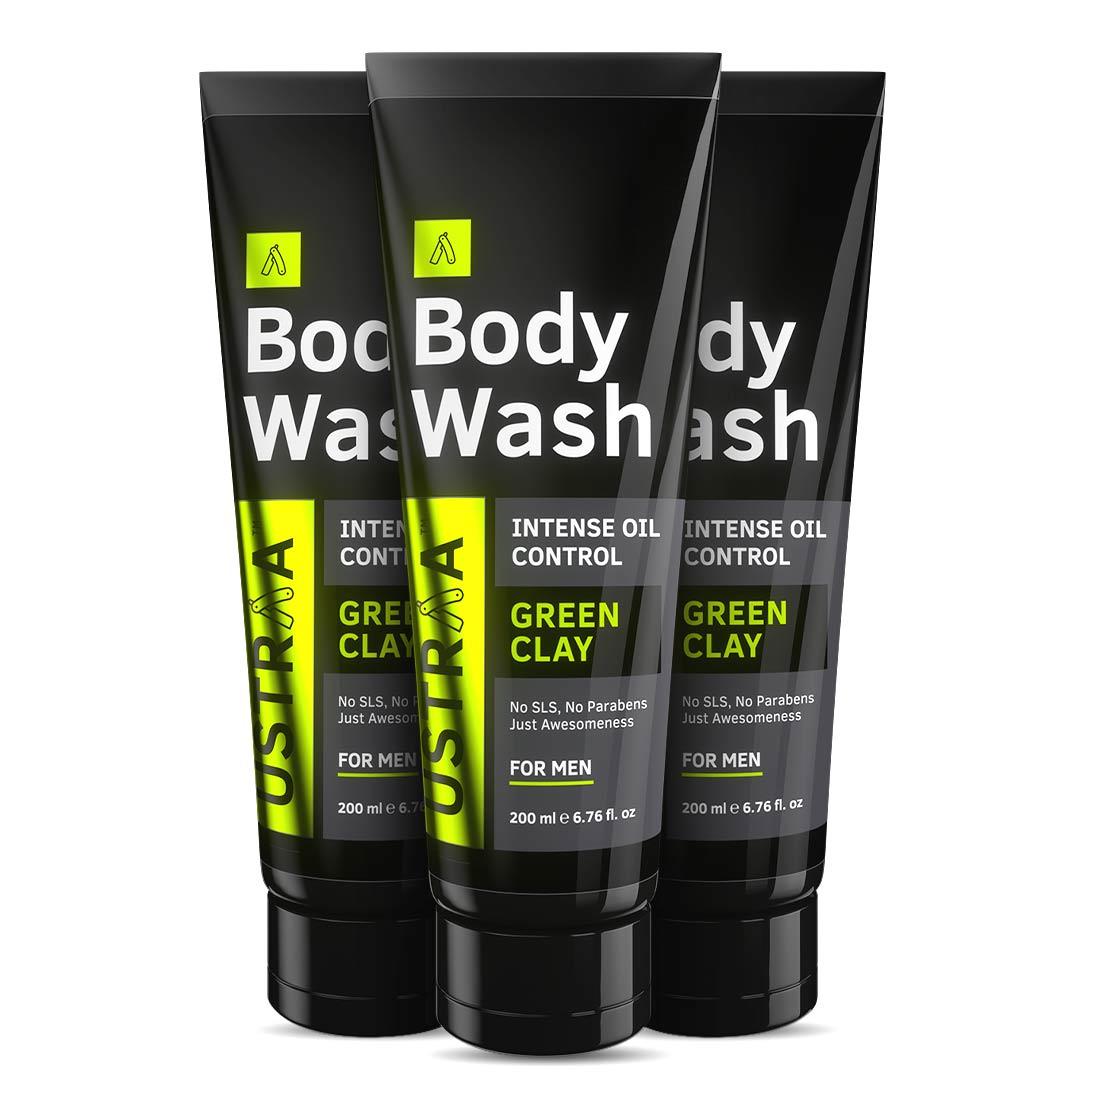 Body Wash for Men - Green Clay - 200 ml - Set of 3